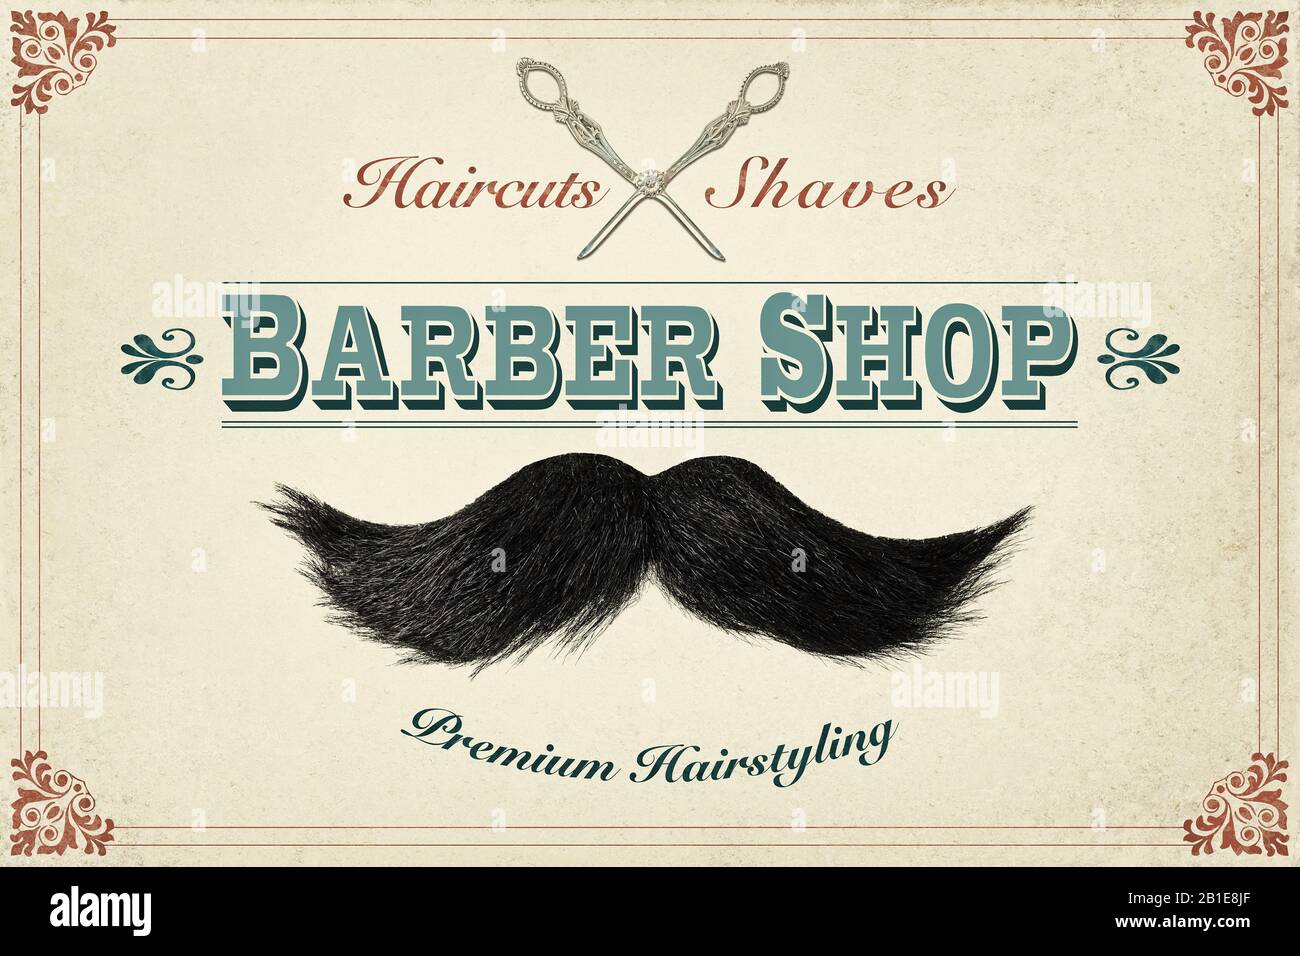 Retro styled design concept for a barber shop with photos of a mustache and silver scissors Stock Photo